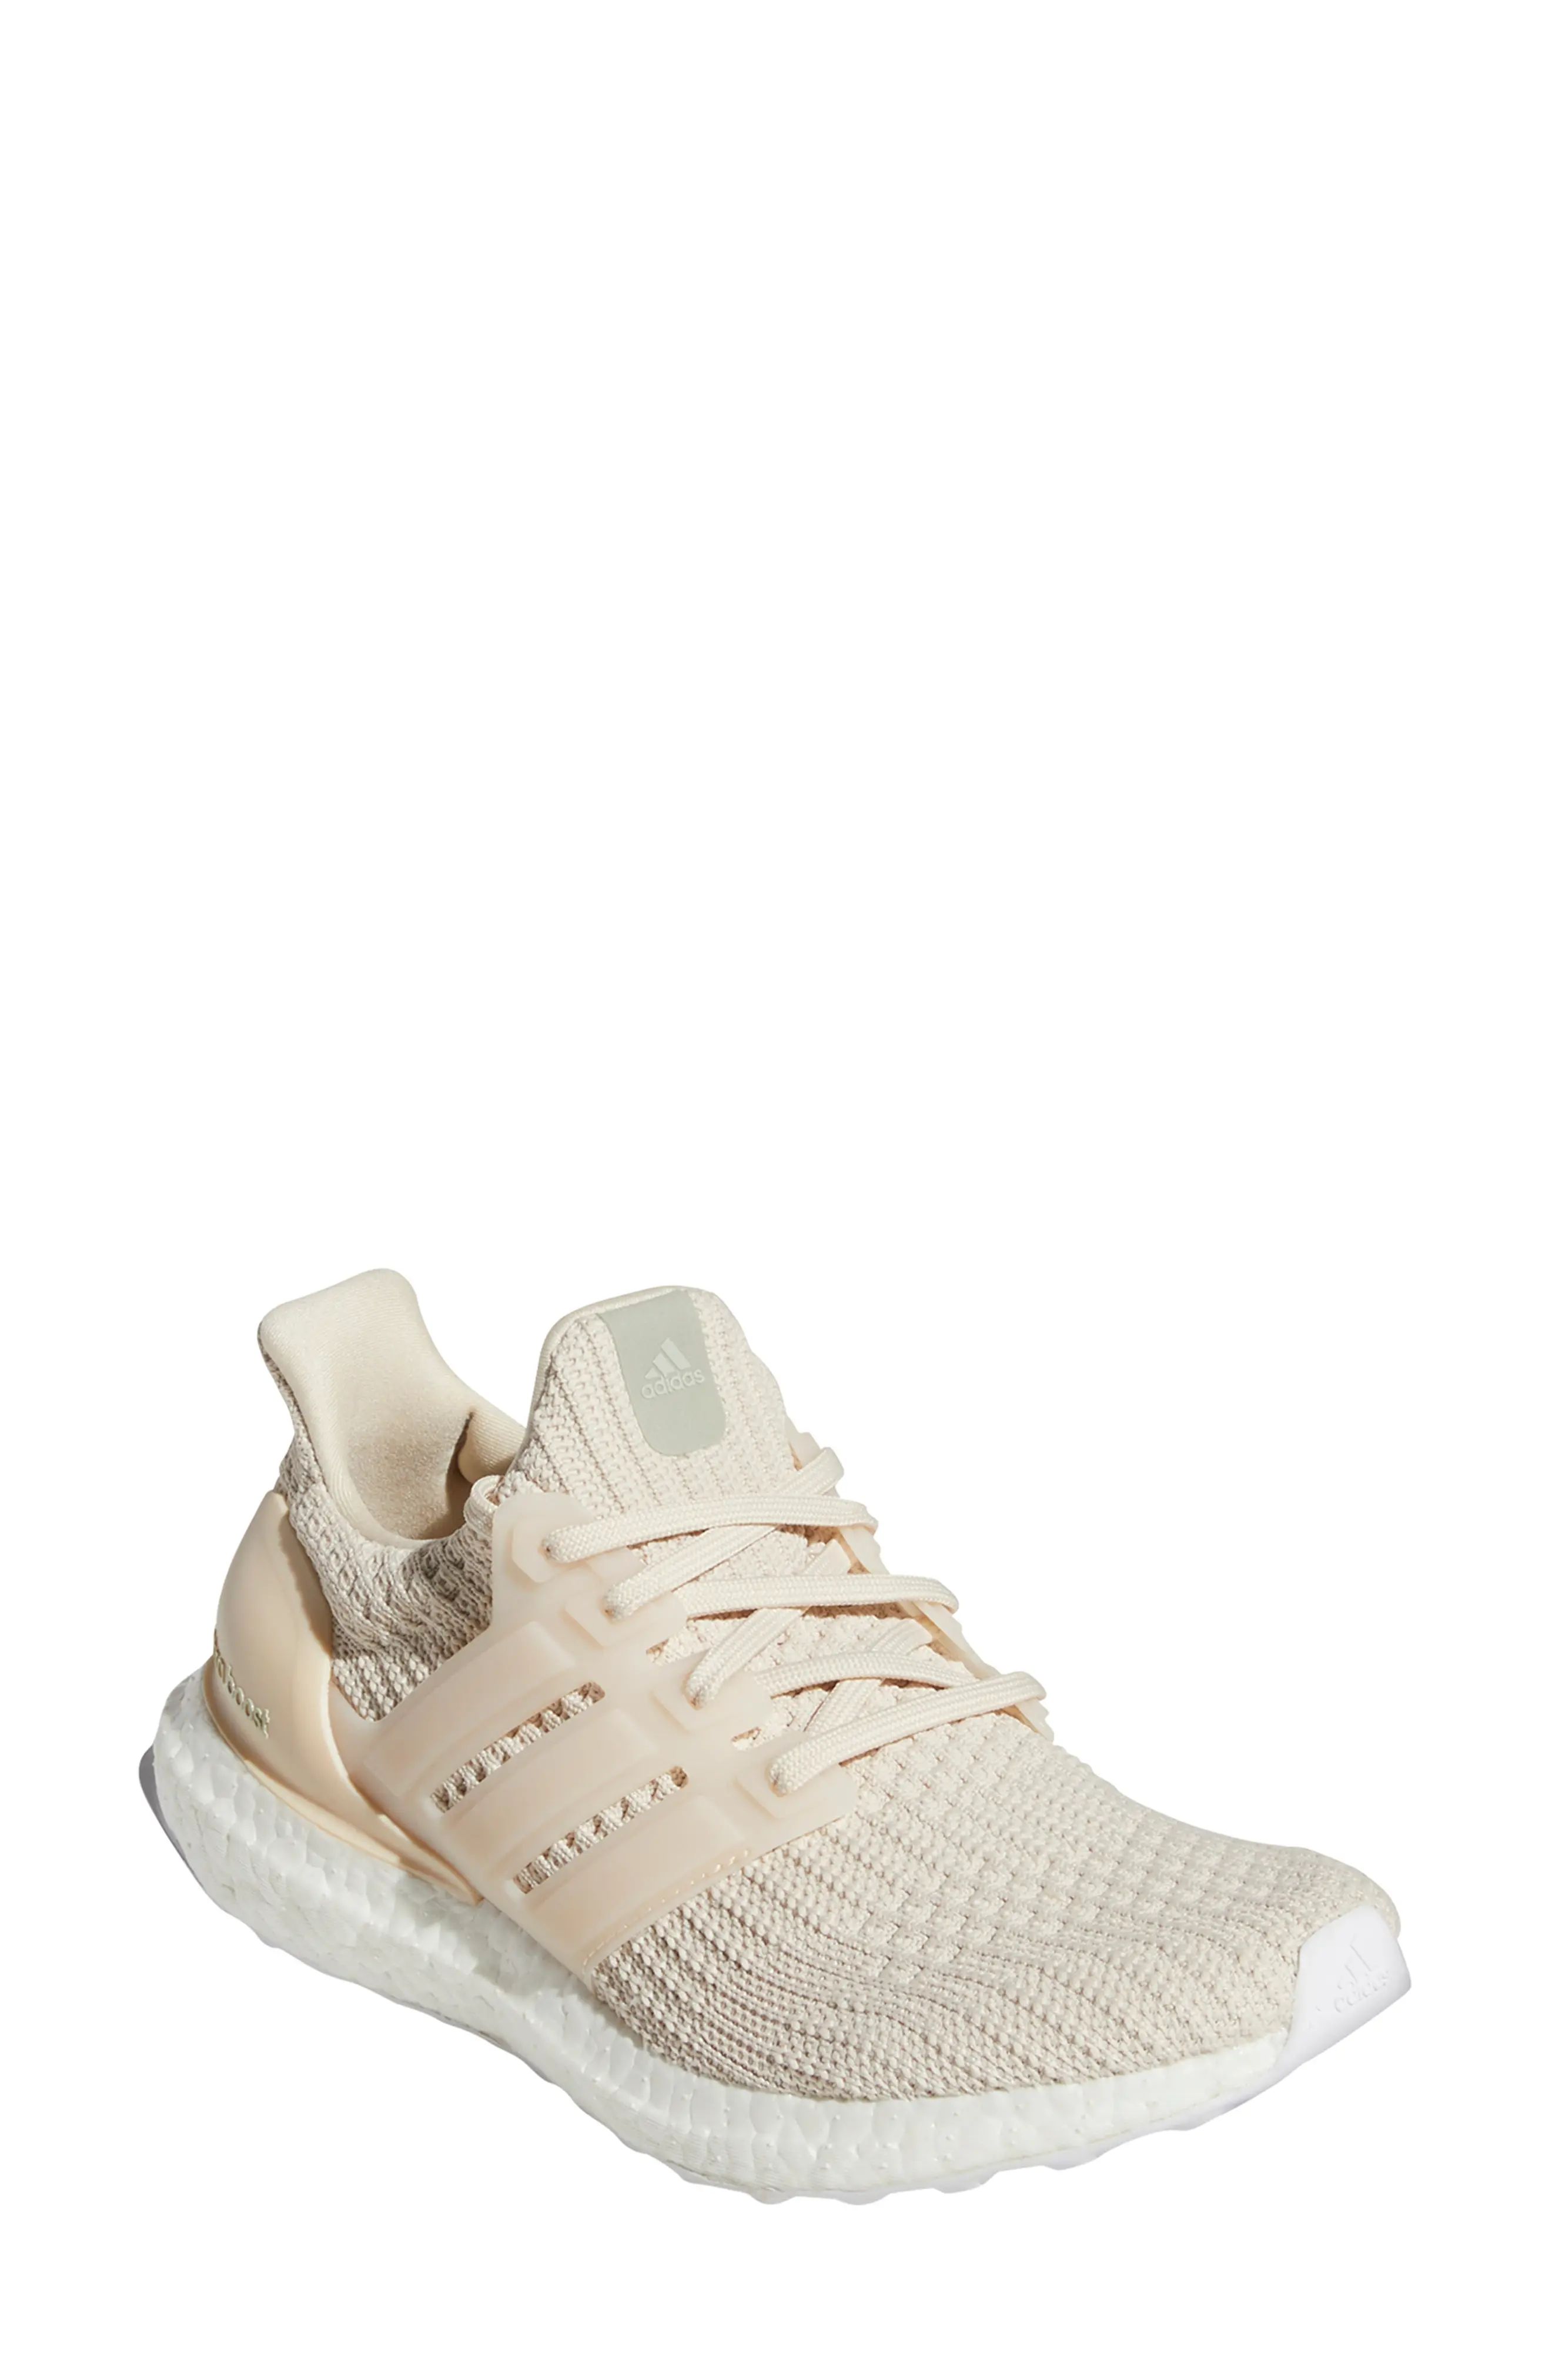 adidas UltraBoost DNA Running Shoe, Size 7 in Halo Ivory/Ivory/Halo Green at Nordstrom | Nordstrom